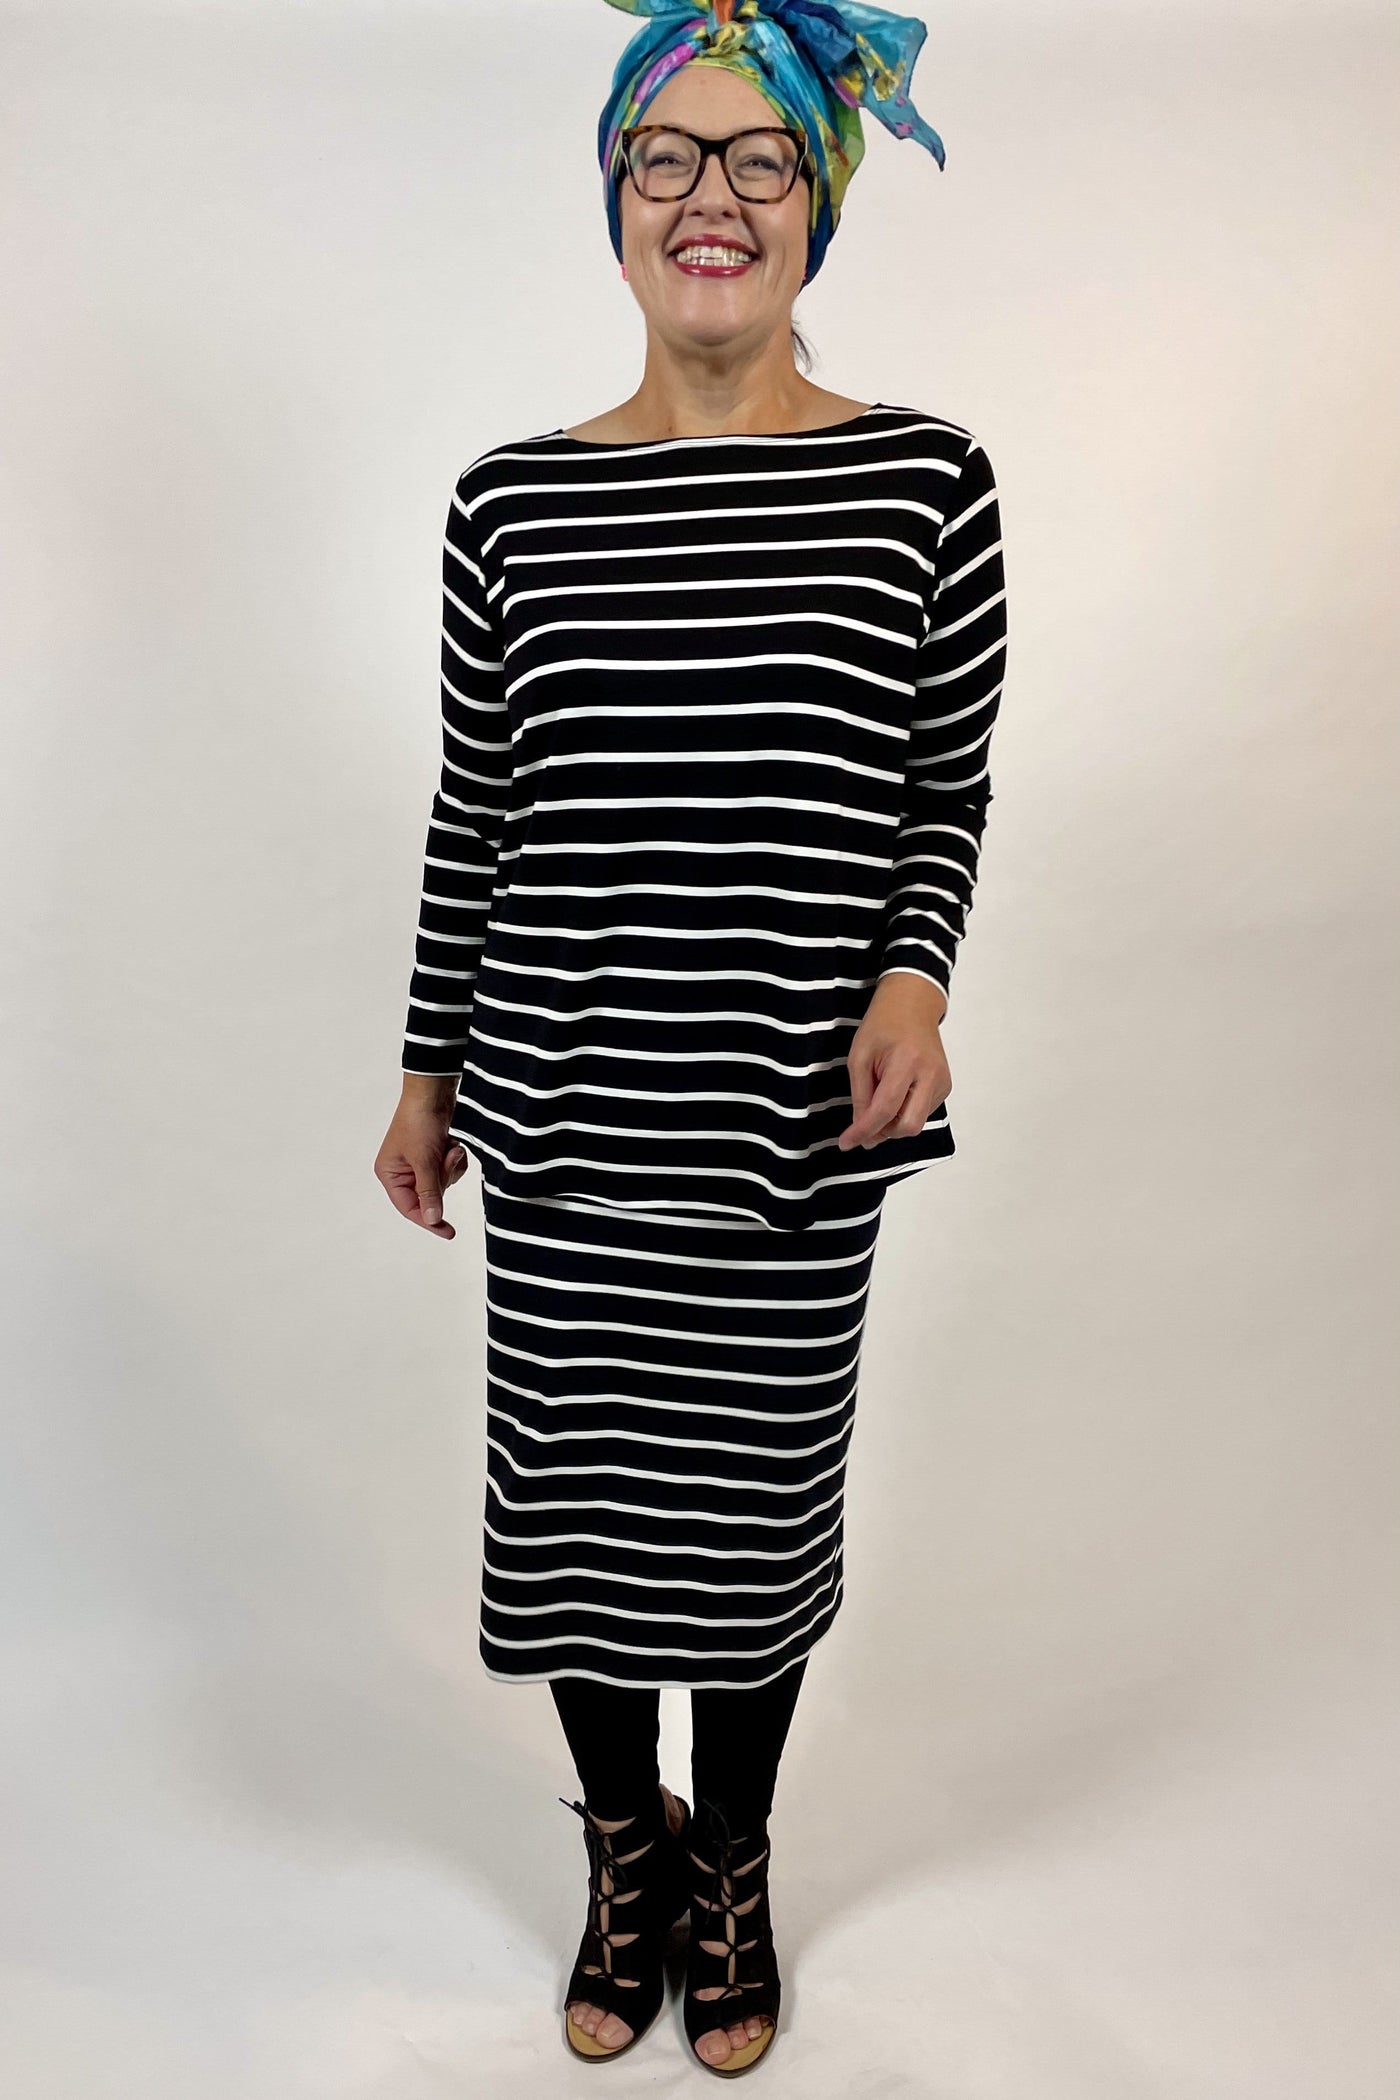 WEYRE Top relaxed boat top black and white stripe